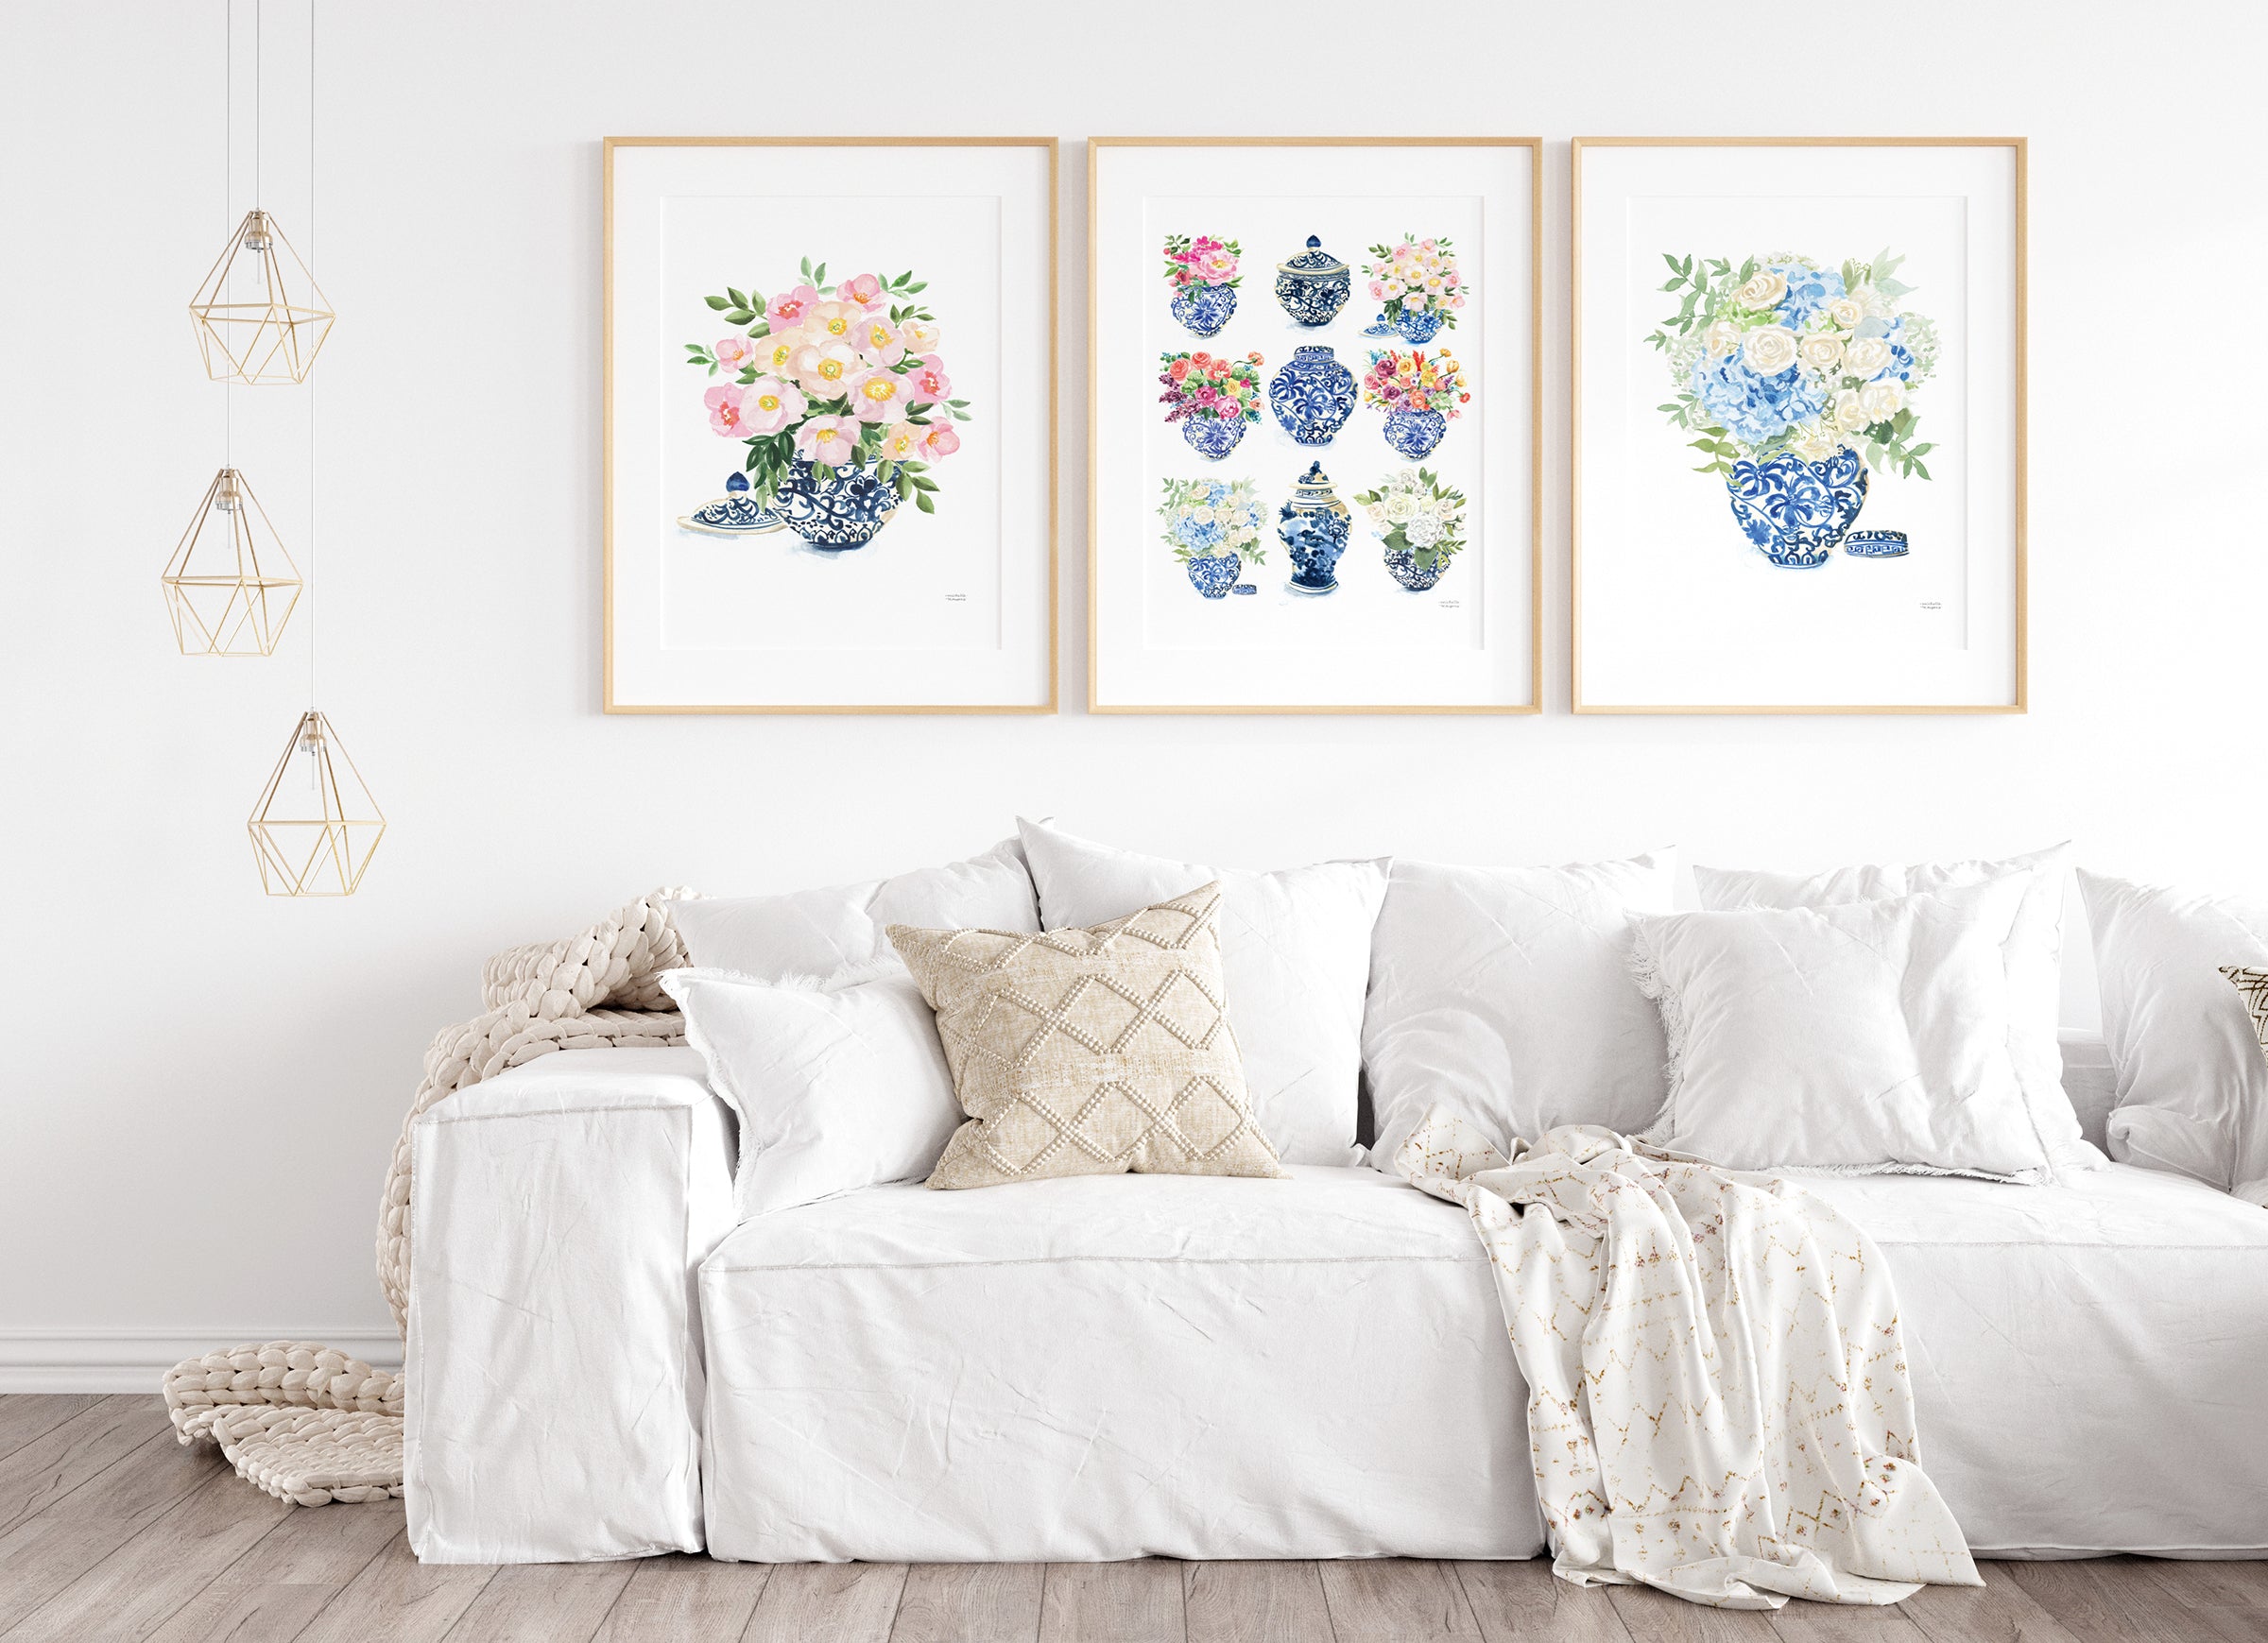 Three paper art prints with flowers in blue and white ginger jars. Watercolor whimsical illustrations perfectly match the traditional Grandmillennial home decor. Unframed ready for you to add to your own matt and or frame you have at home.